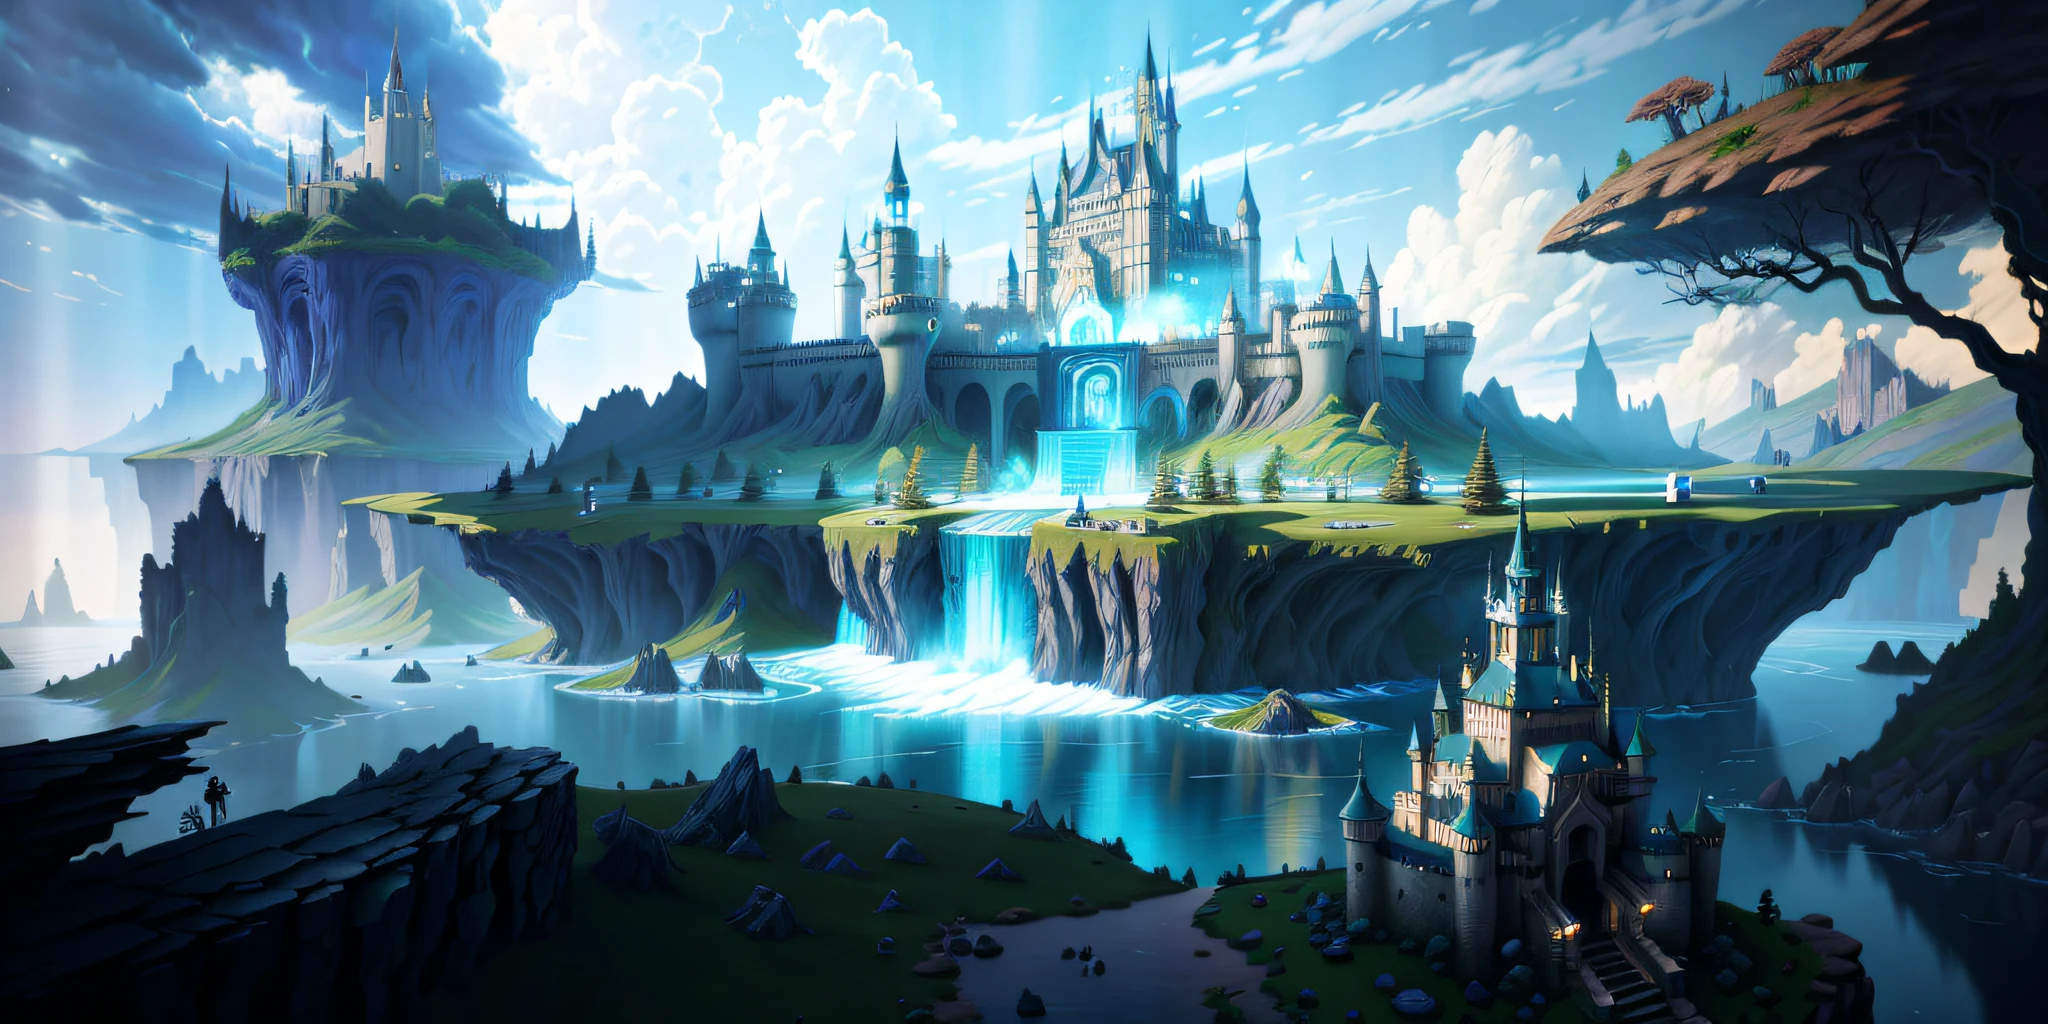 There is a castle in the middle of the lake，with a waterfalls, Fantasy art Behance, magical fantasy 2 d concept art, fantasy concept art, fantasy game art style, Fantasy castle, Detailed digital 2D fantasy art, Fantasy art style, Unreal Engine fantasy art, Digital 2D fantasy art, Epic fantasy digital art style, fantasy world concept, high fantasy castle